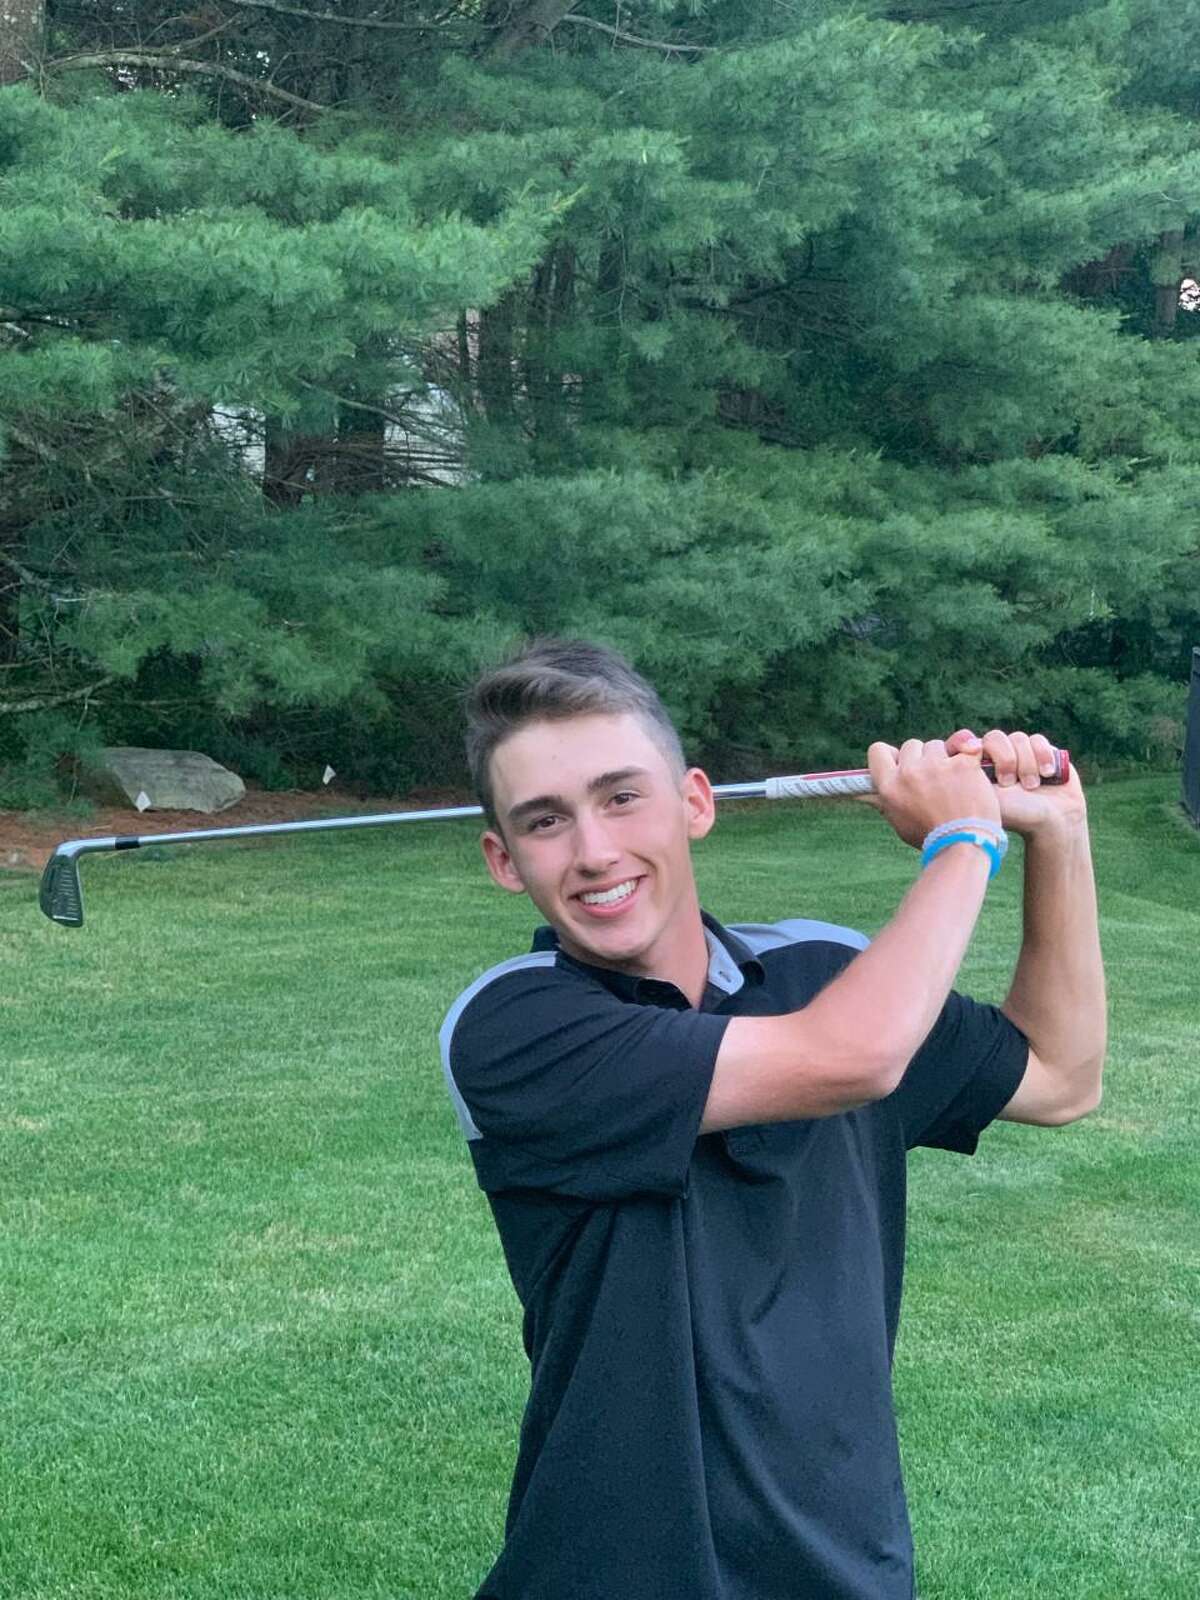 Hand’s Reece Scott shot a 77 at Blue Fox Run Golf Course in Avon to earn medalist laurels at the Walter Lowell Invitational.